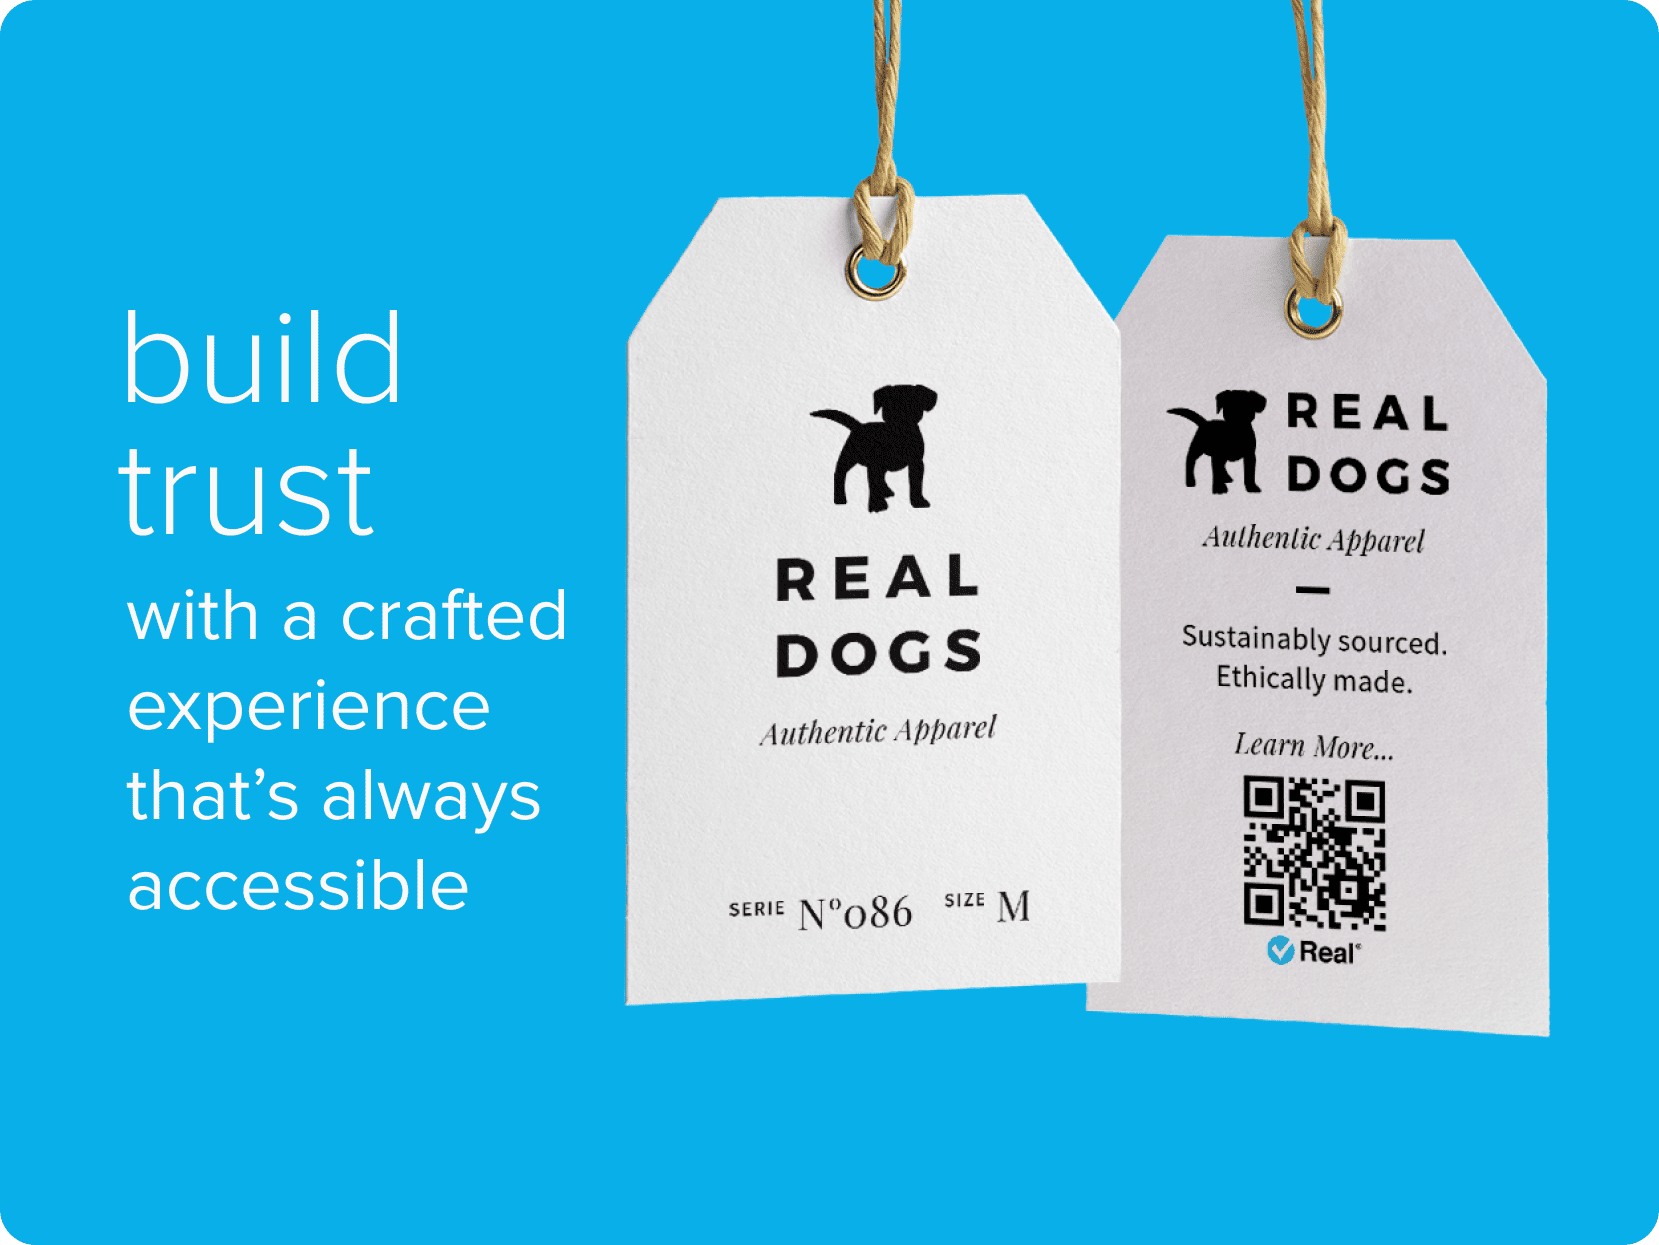 Build trust with an experience that's always accessible